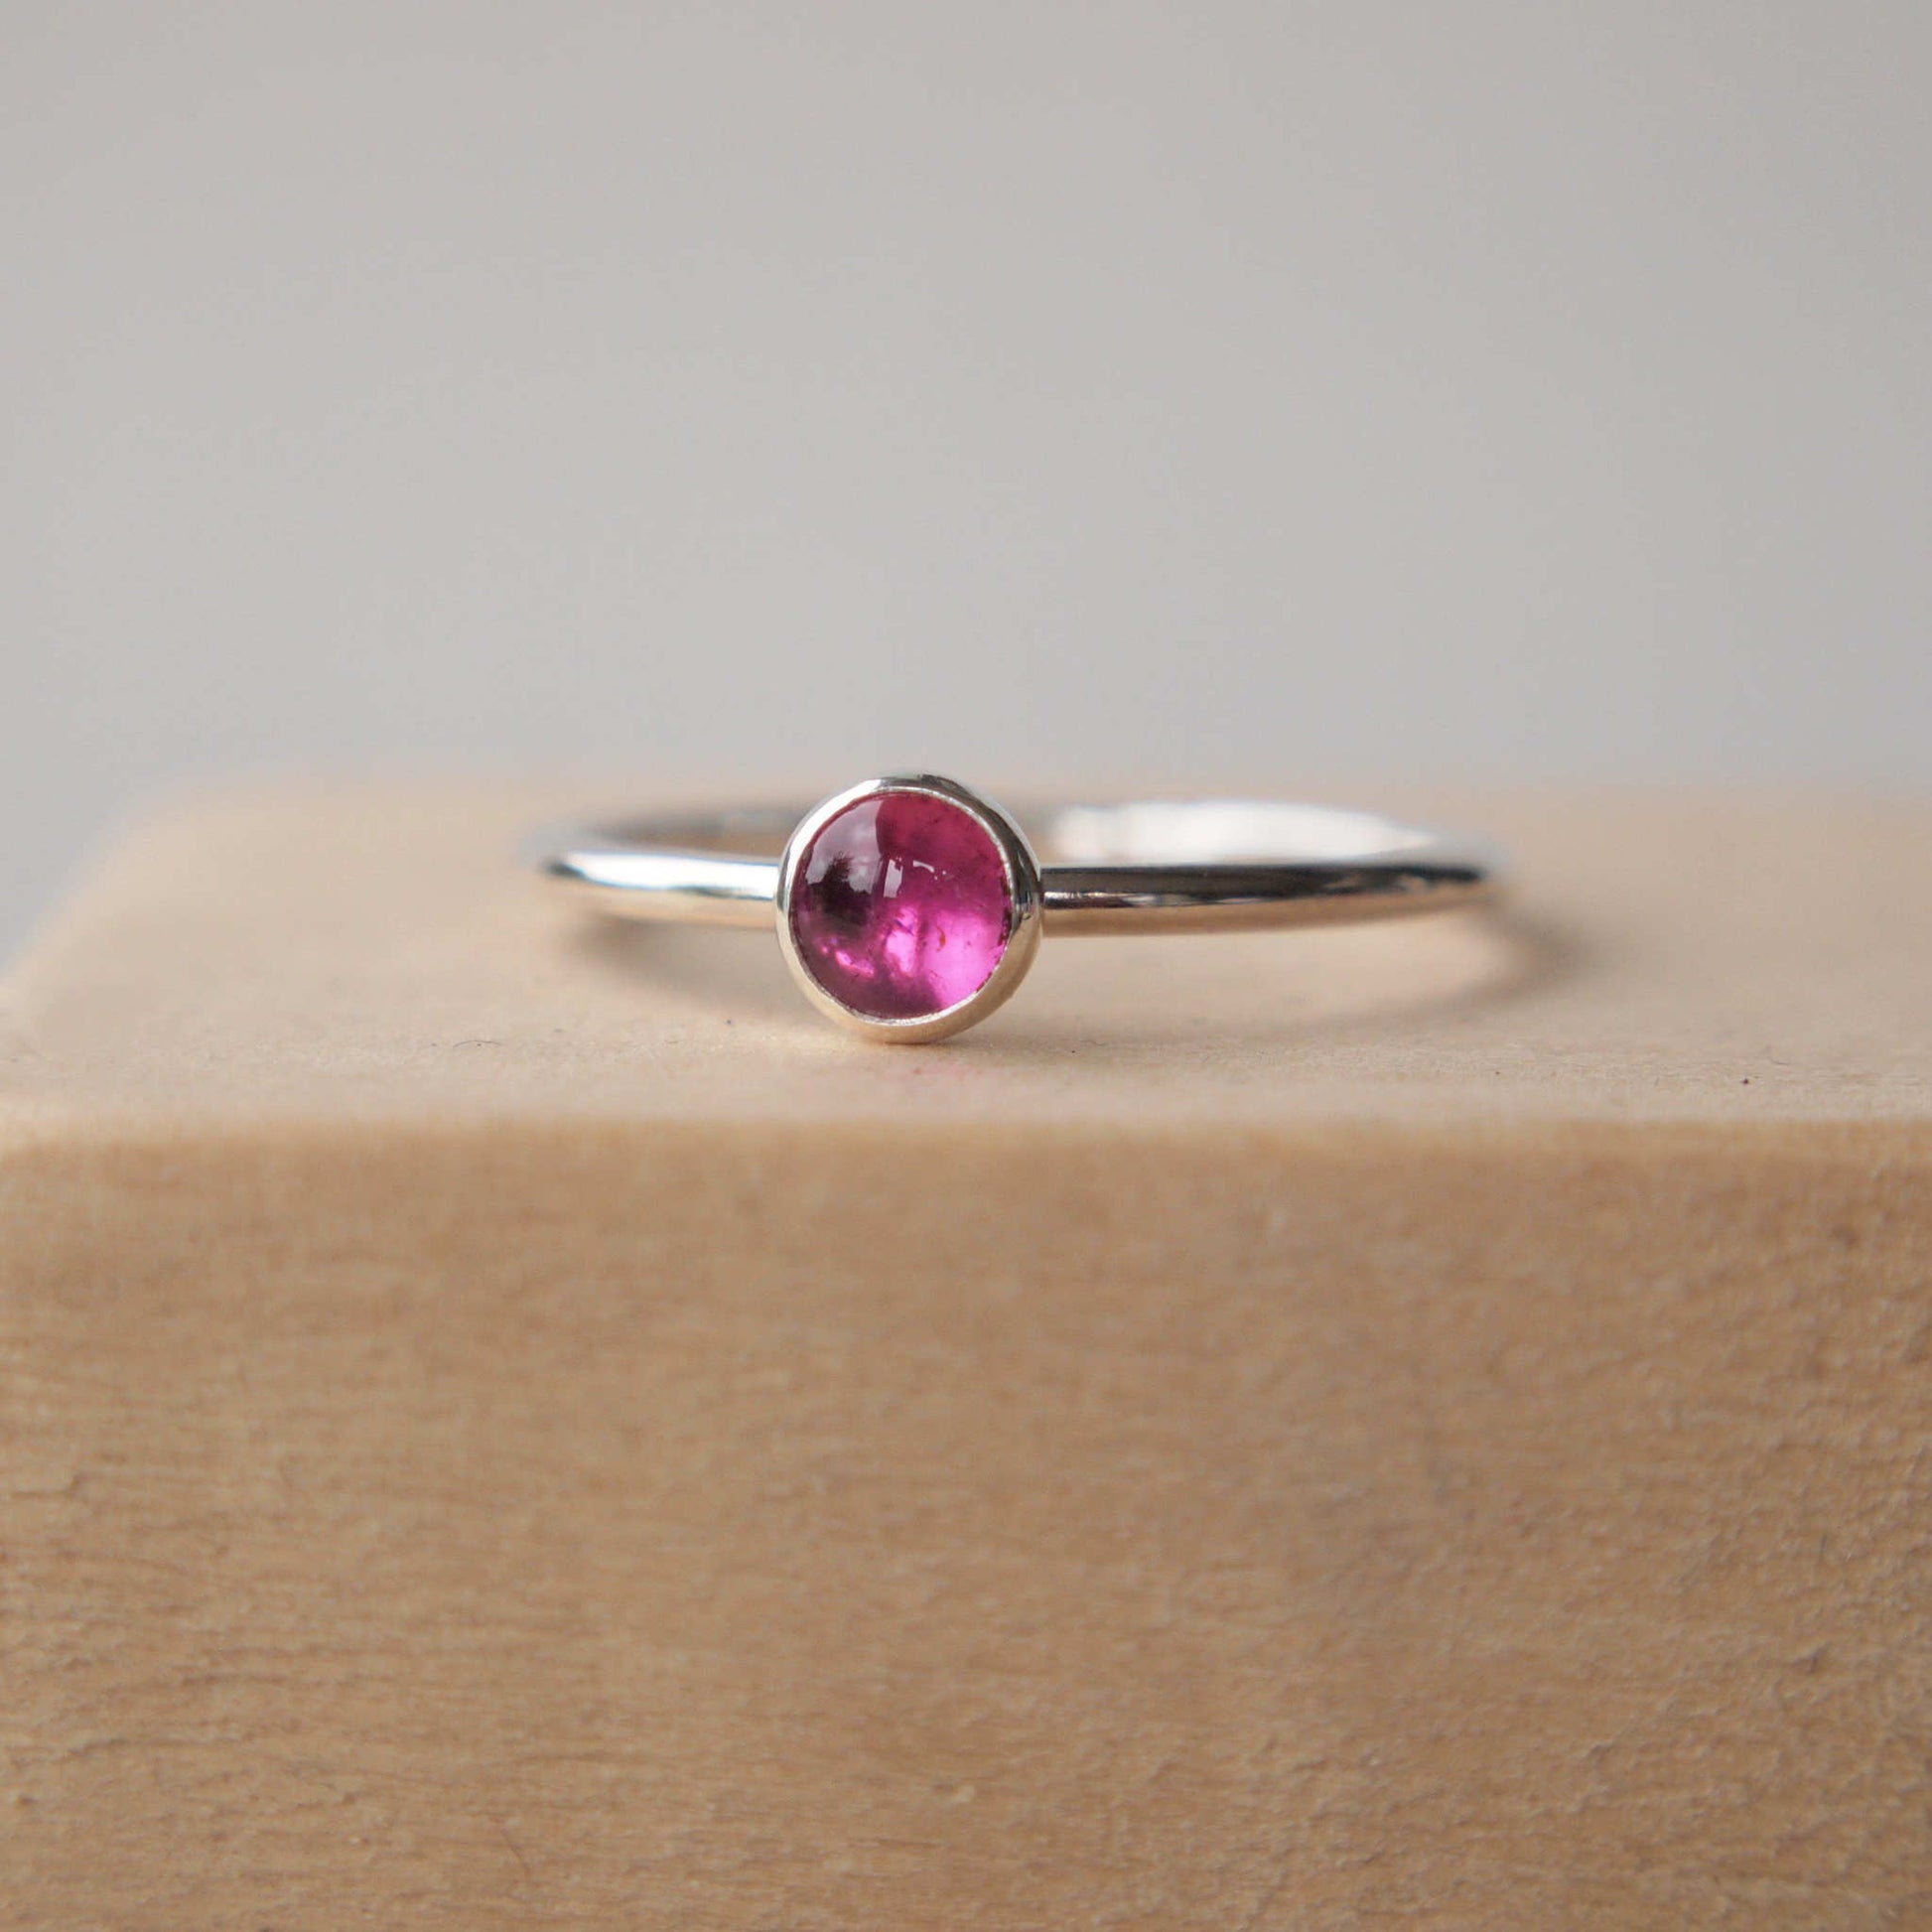 Solitaire Pink gemstone ring made from Sterling SIlver and Pink Tourmaline. The stone is round and measures 5mm in diameter. Handmade by maram jewellery in Scotland